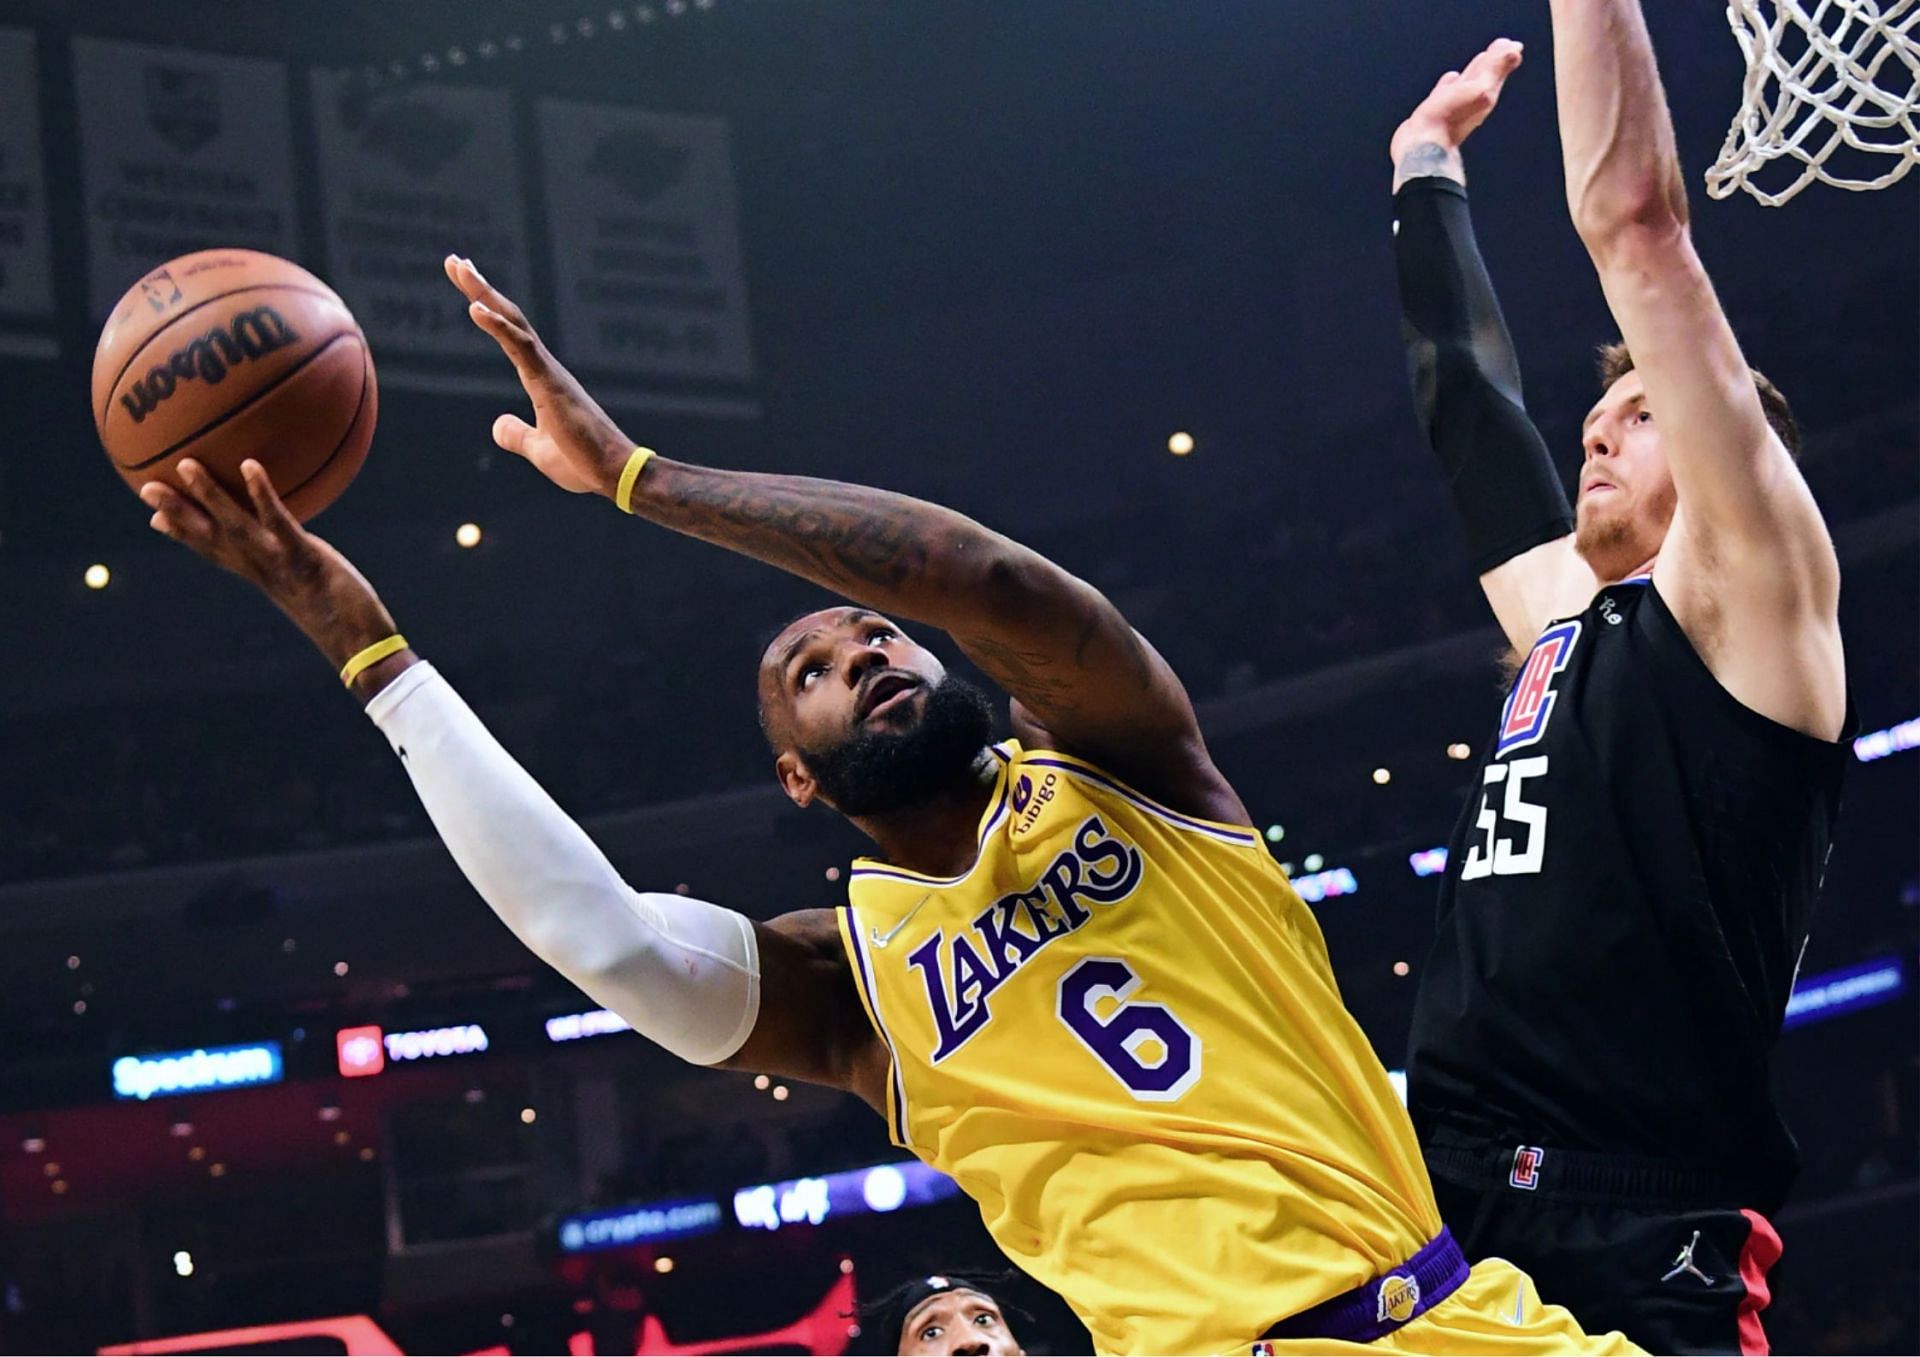 LeBron James and the LA Lakers have now lost 11 straight games to the LA Clippers.